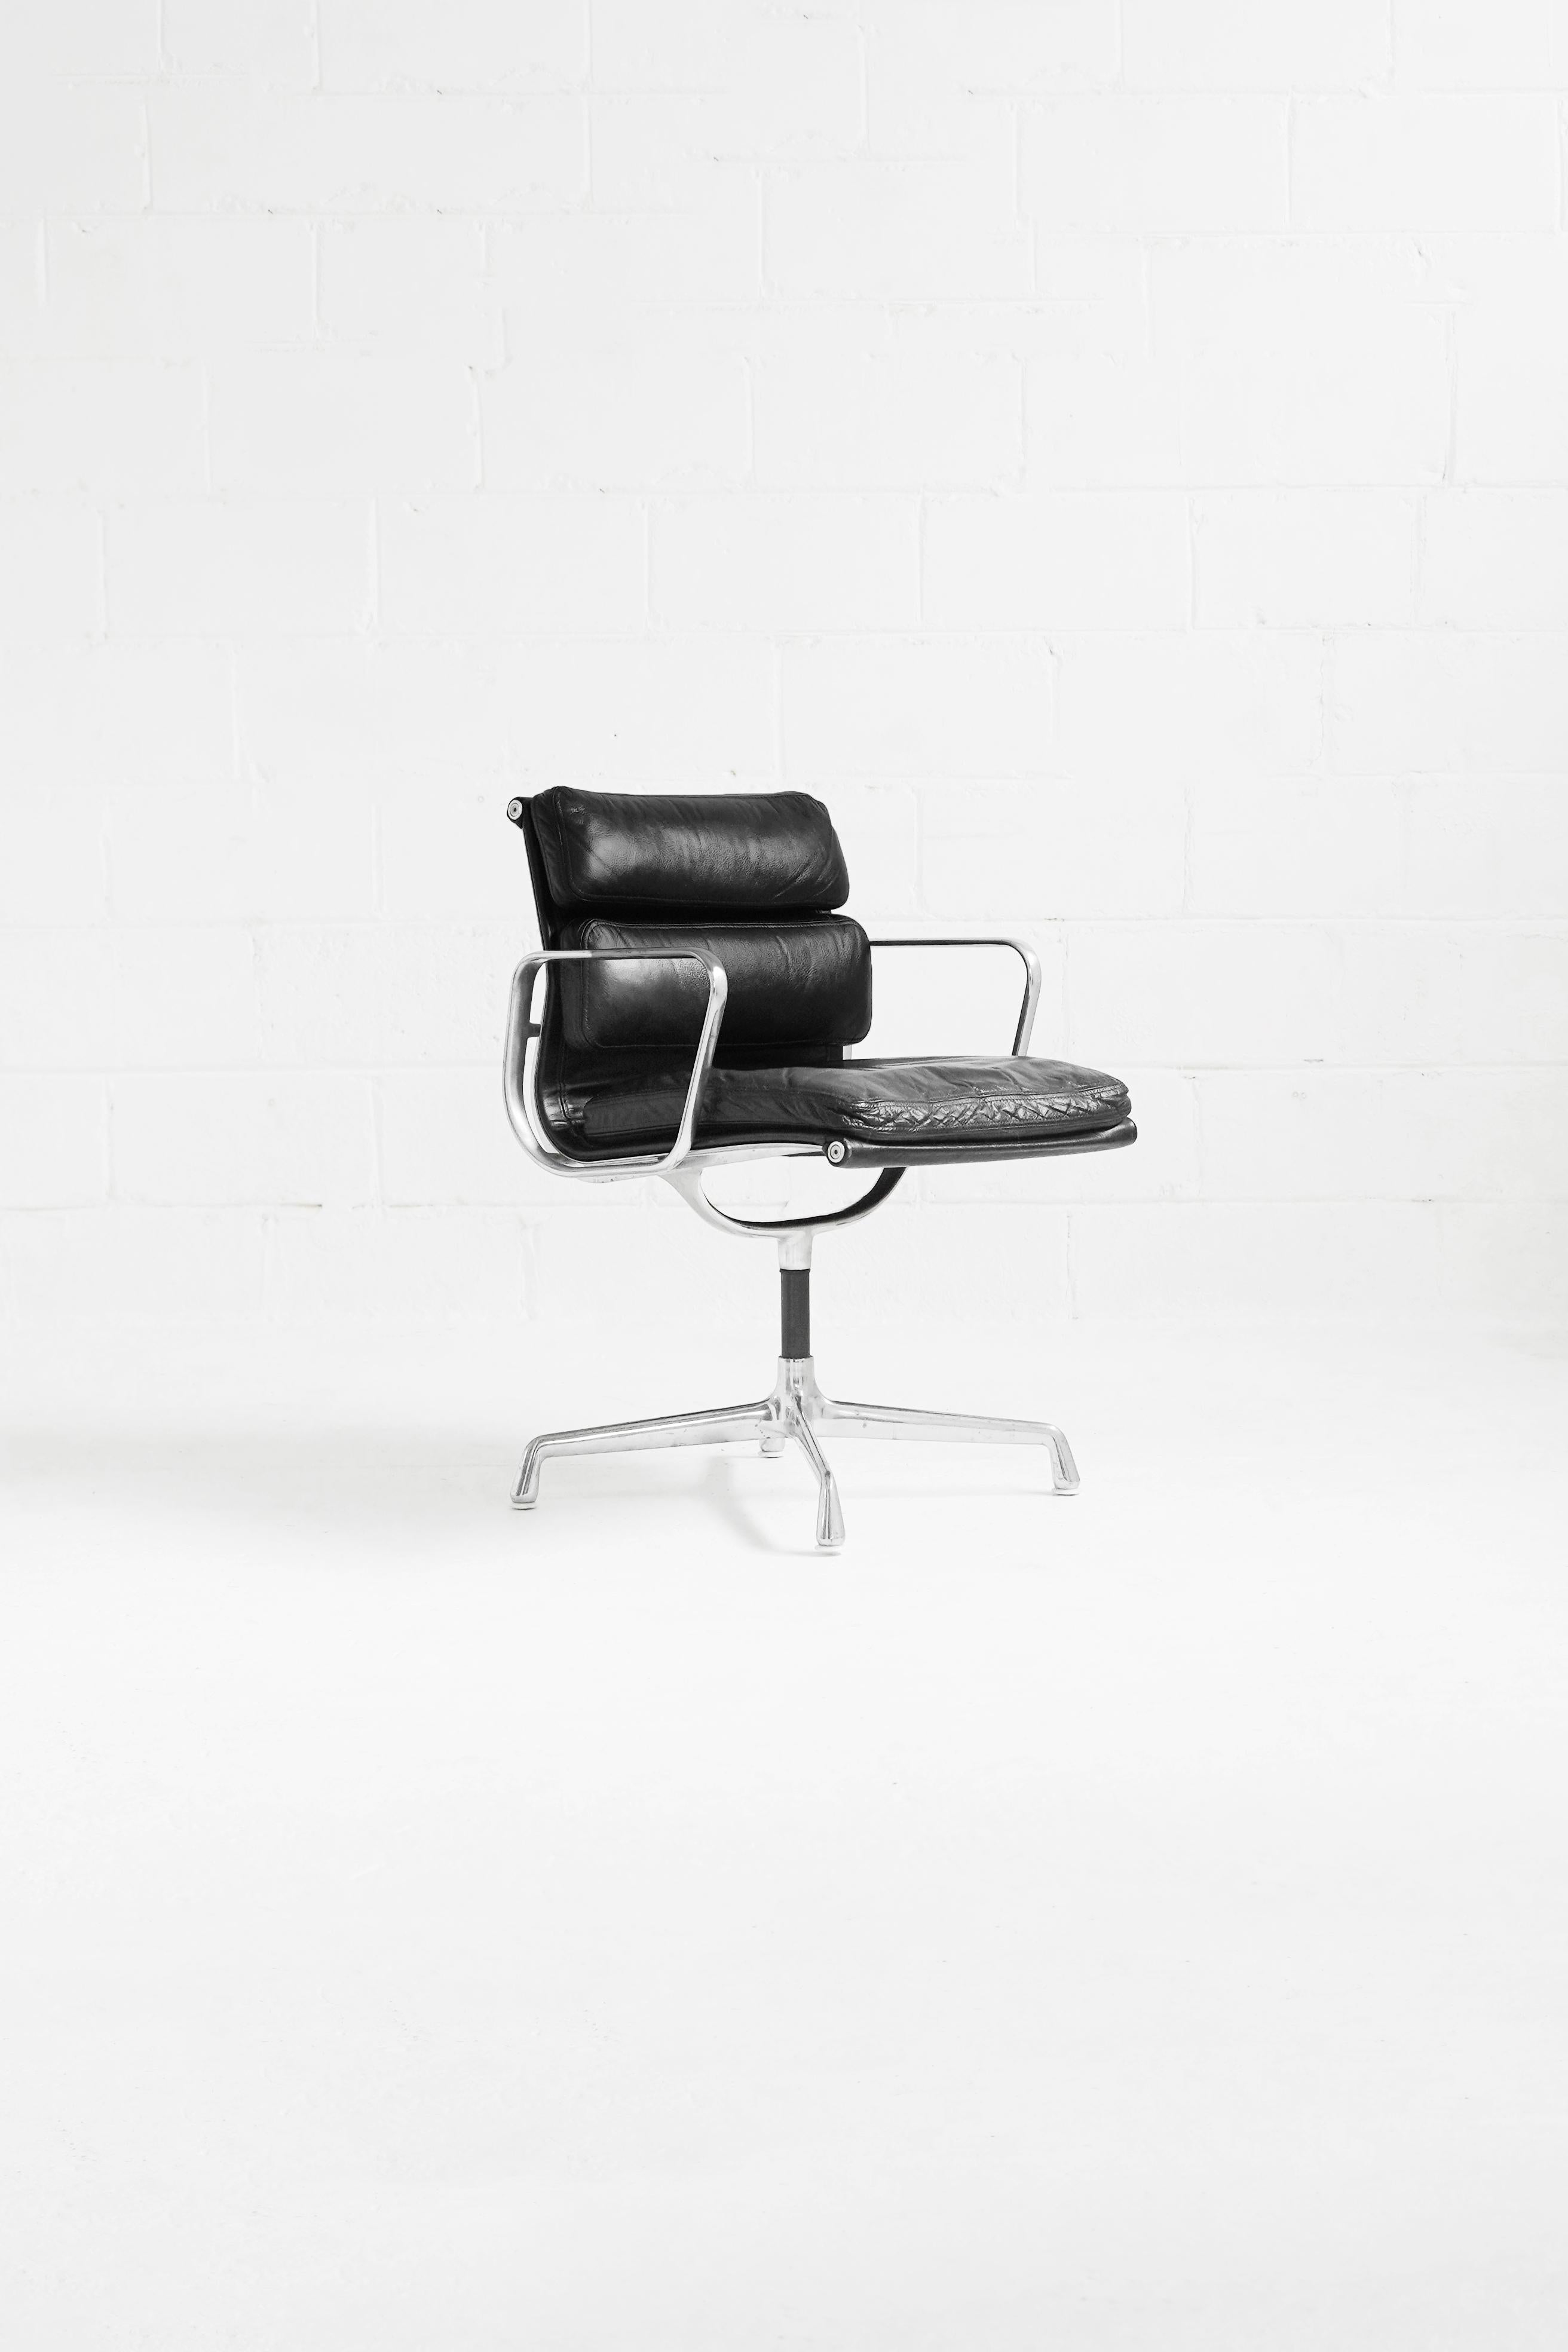 Eames Soft Pad Management Chair by Charles and Ray Eames for Herman Miller 8